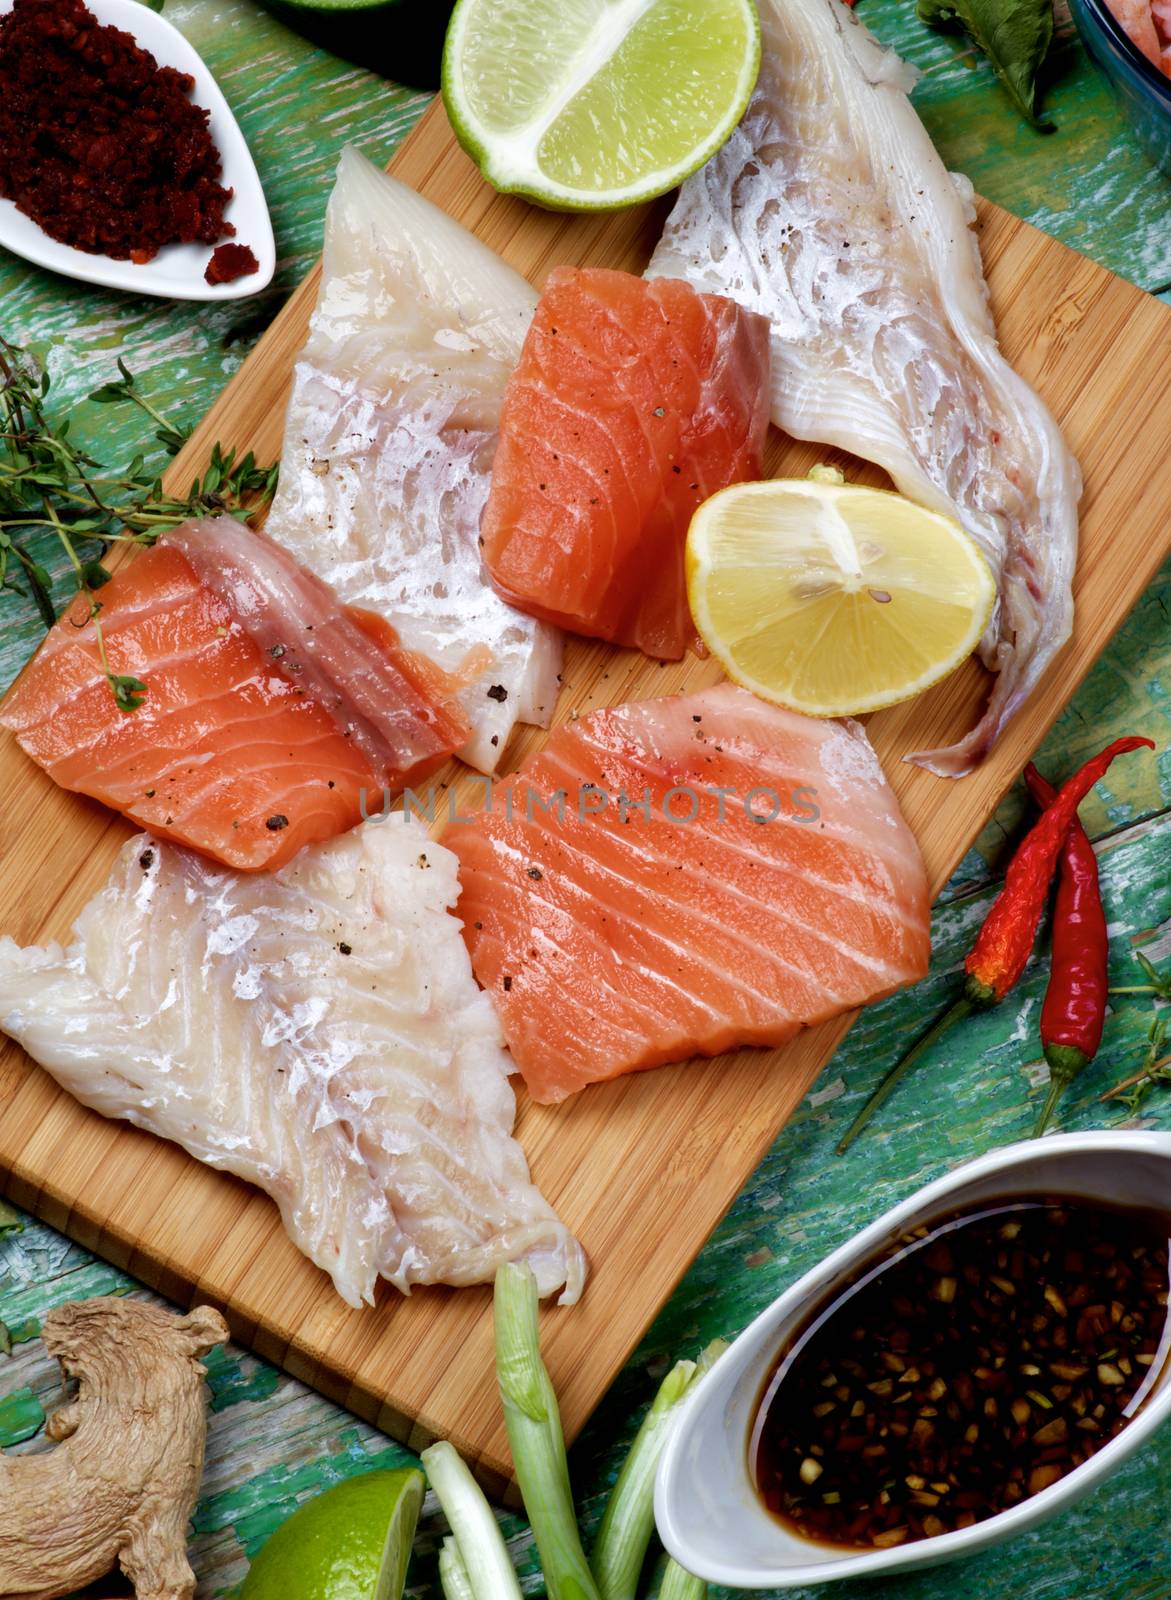 Arrangement of Raw Fillet of Salmon and Cod, Greens, Spices, Sauces and Lemon closeup on Cracked Wooden background